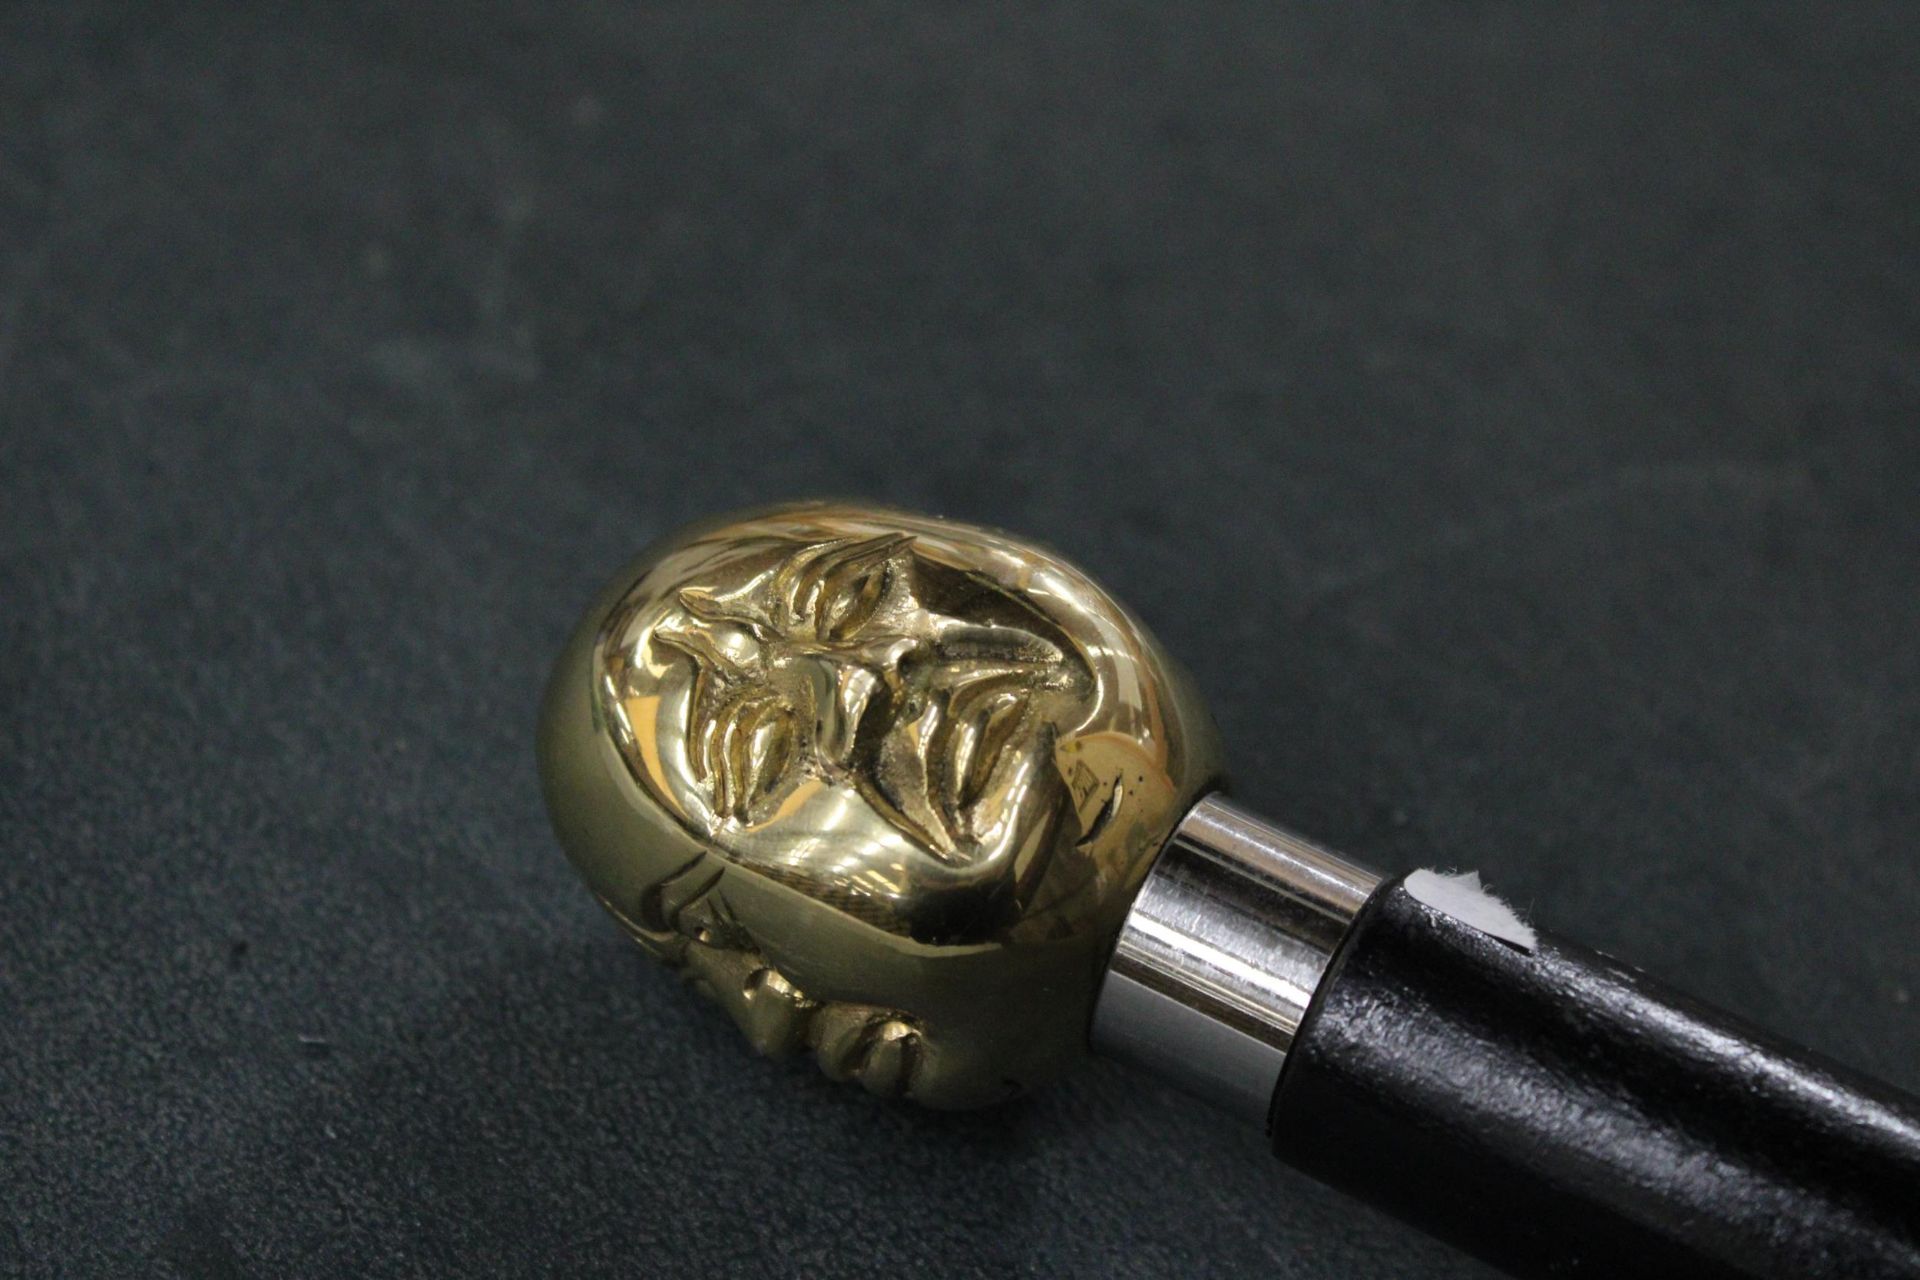 A BRASS FOUR FACED BUDDHA HANDLE WALKING STICK - Image 3 of 6